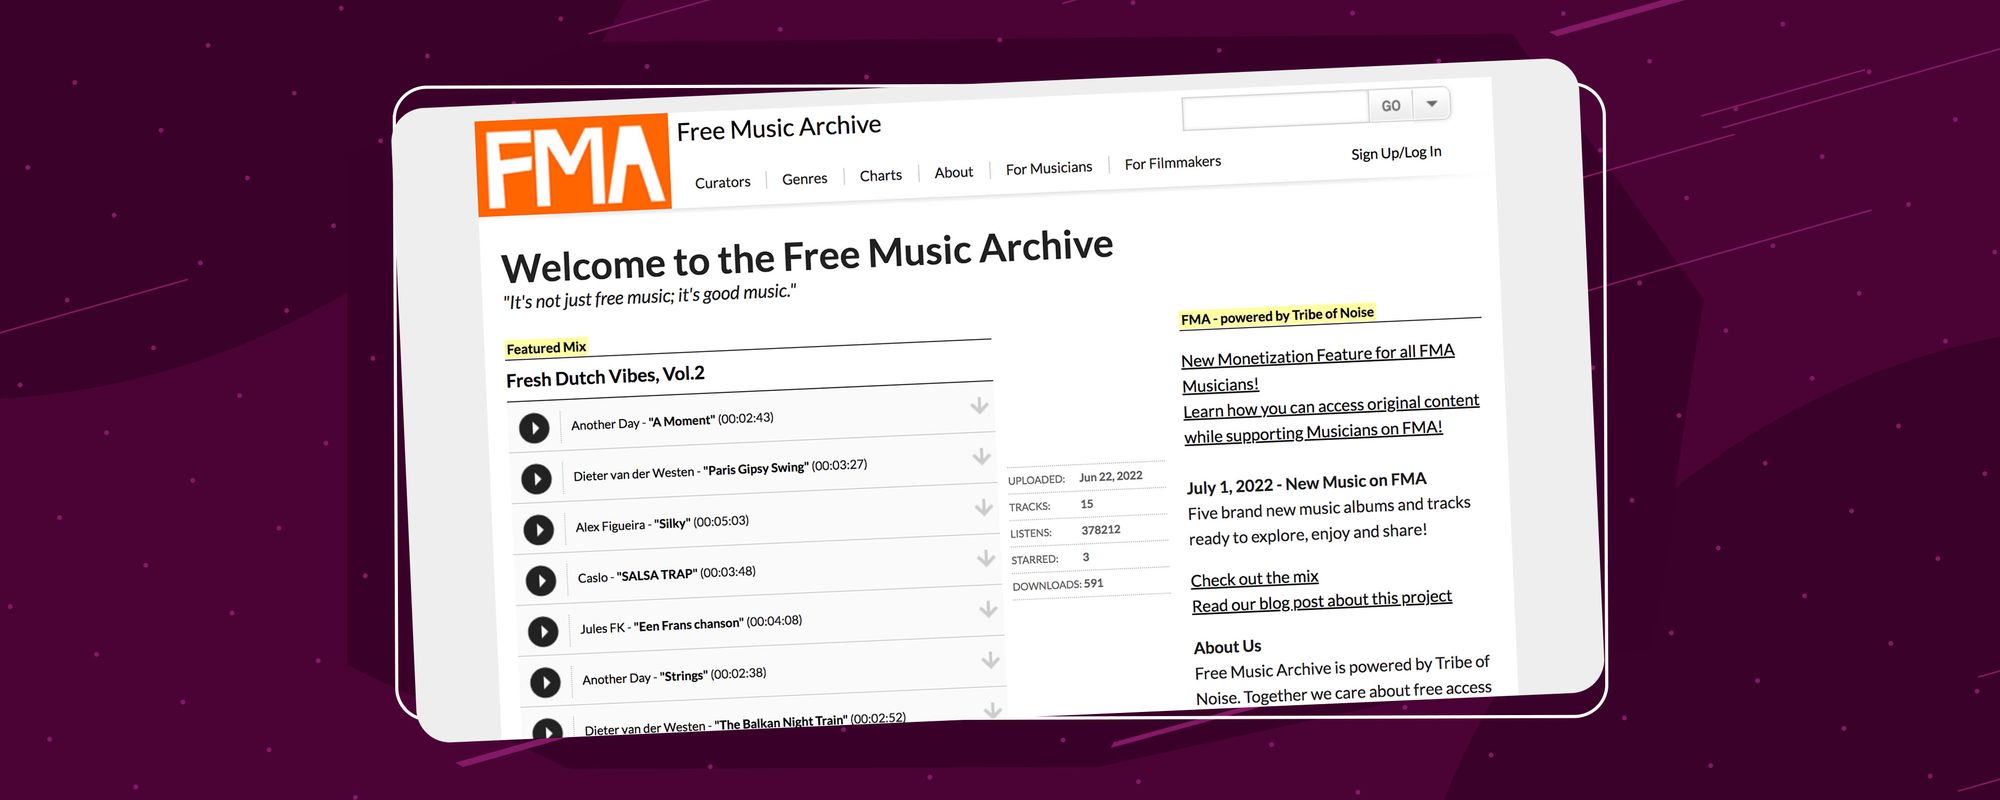 The Free Music Archive royalty-free music website homepage